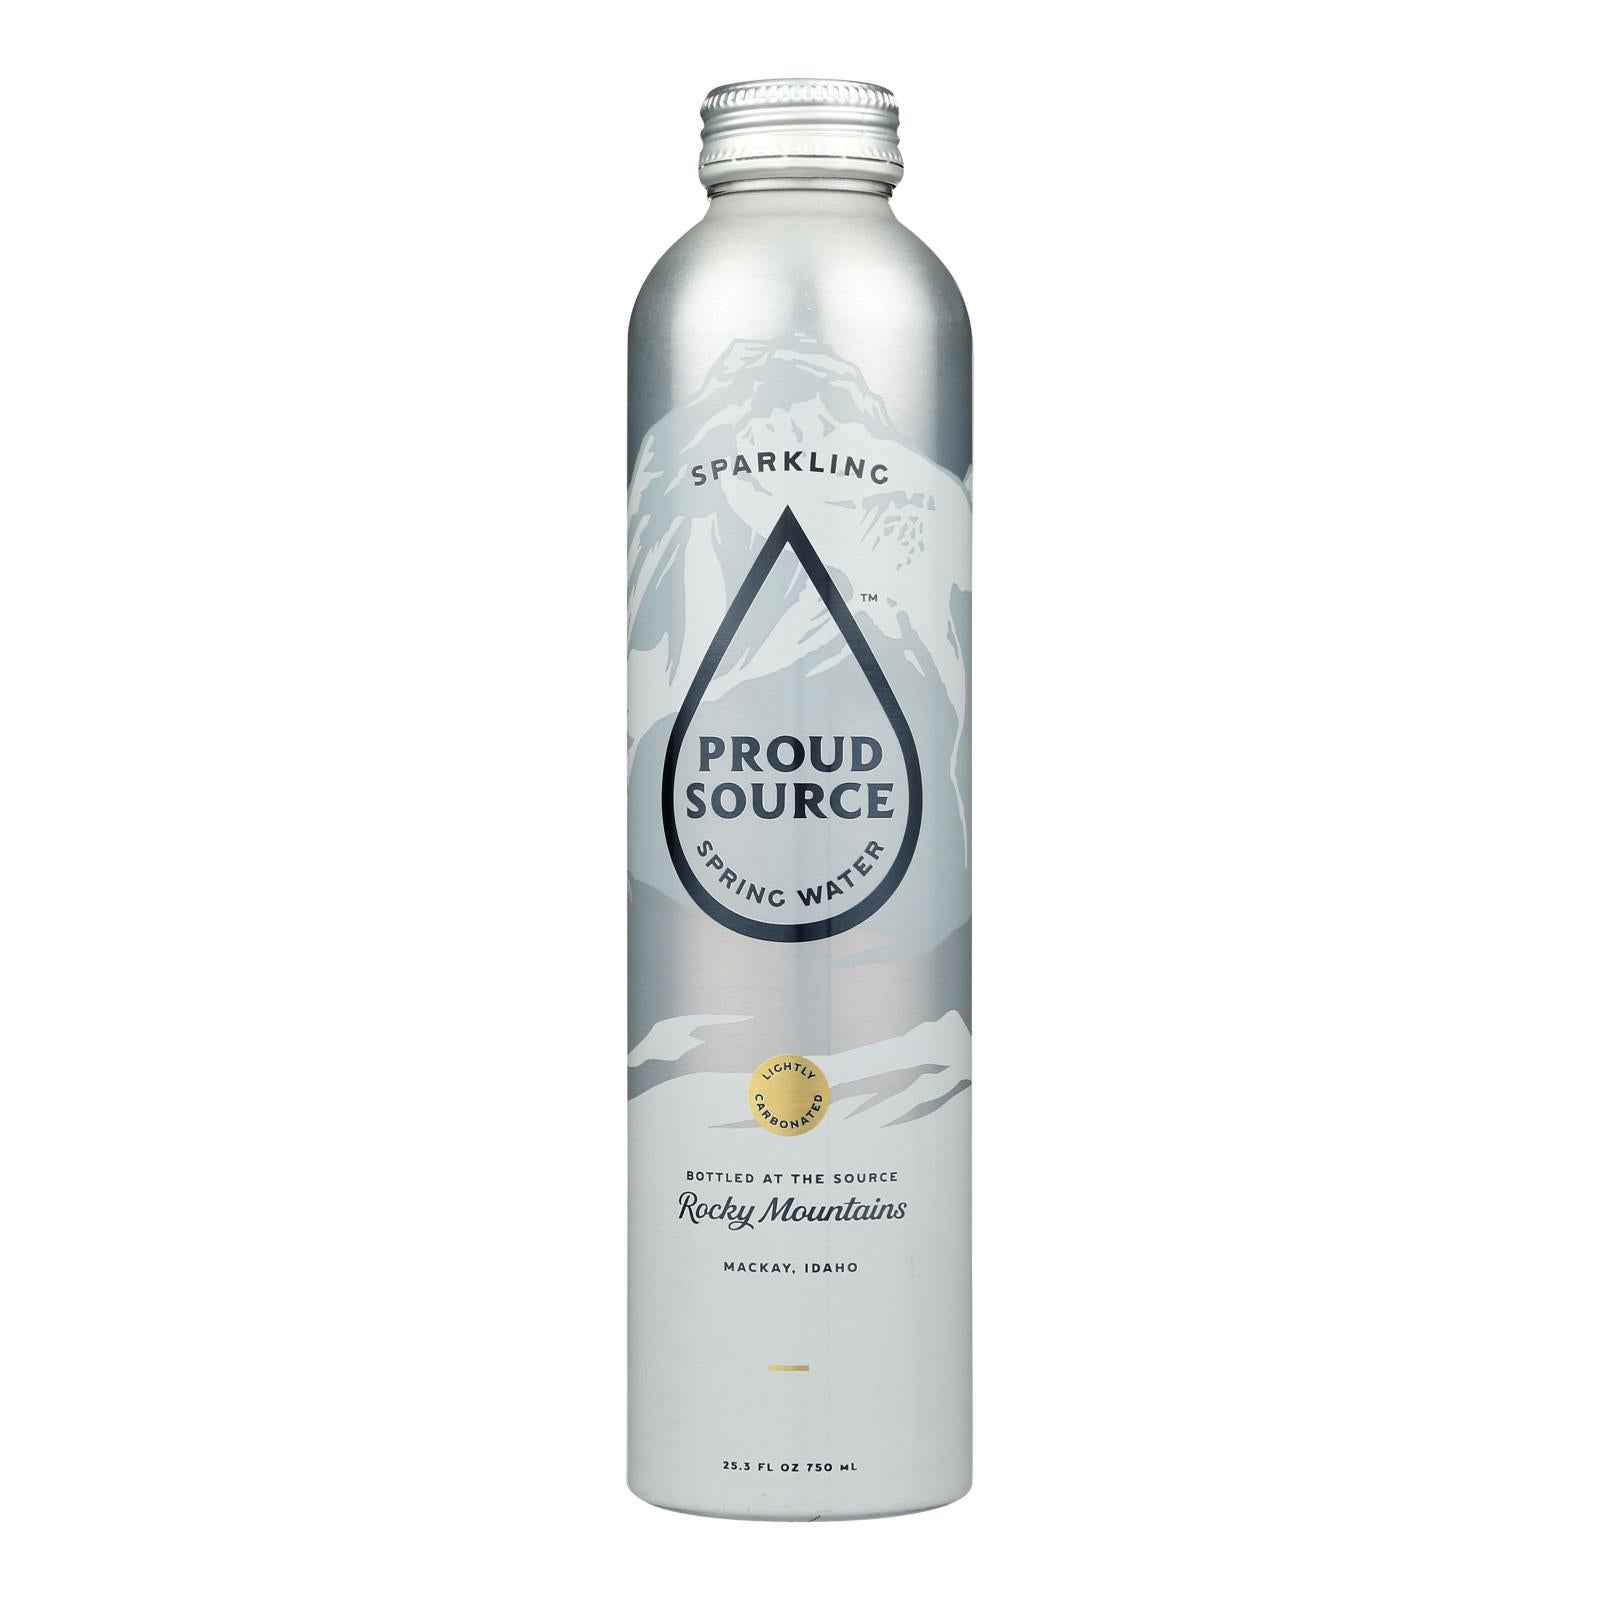 Proud Source natural spring water (25.3 fl oz, Case of 12)